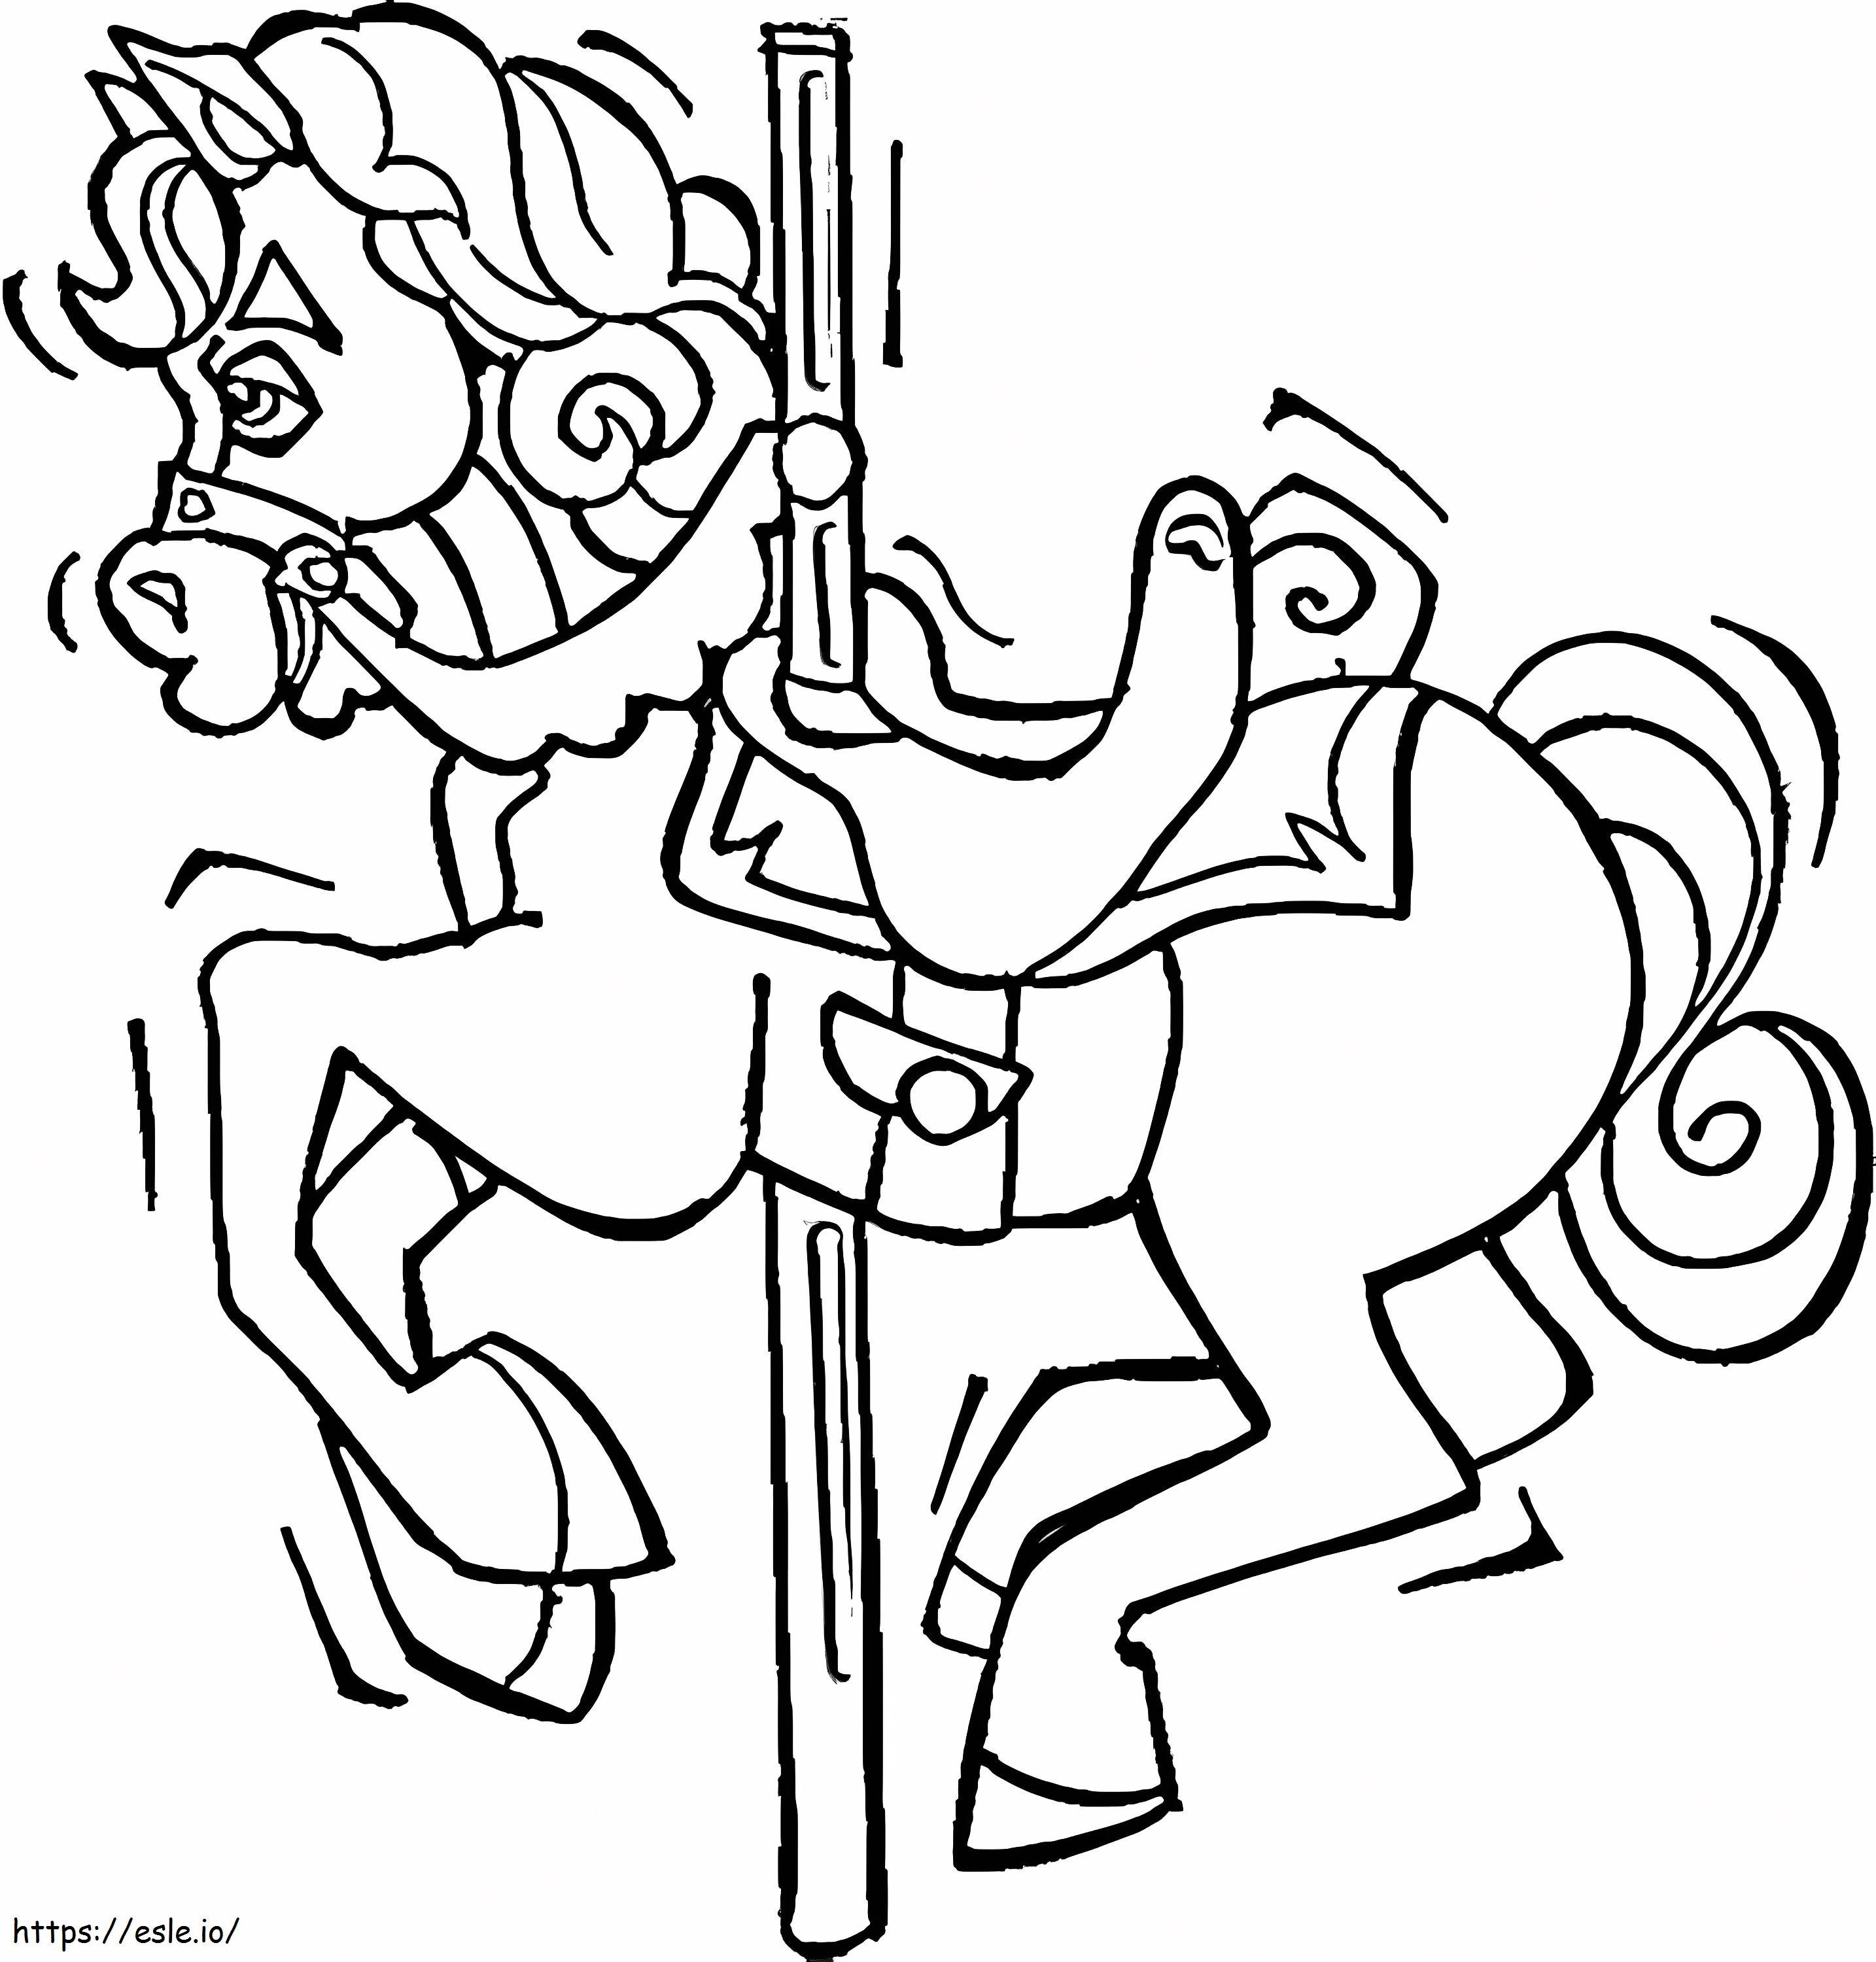 Funny Carousel Horse coloring page